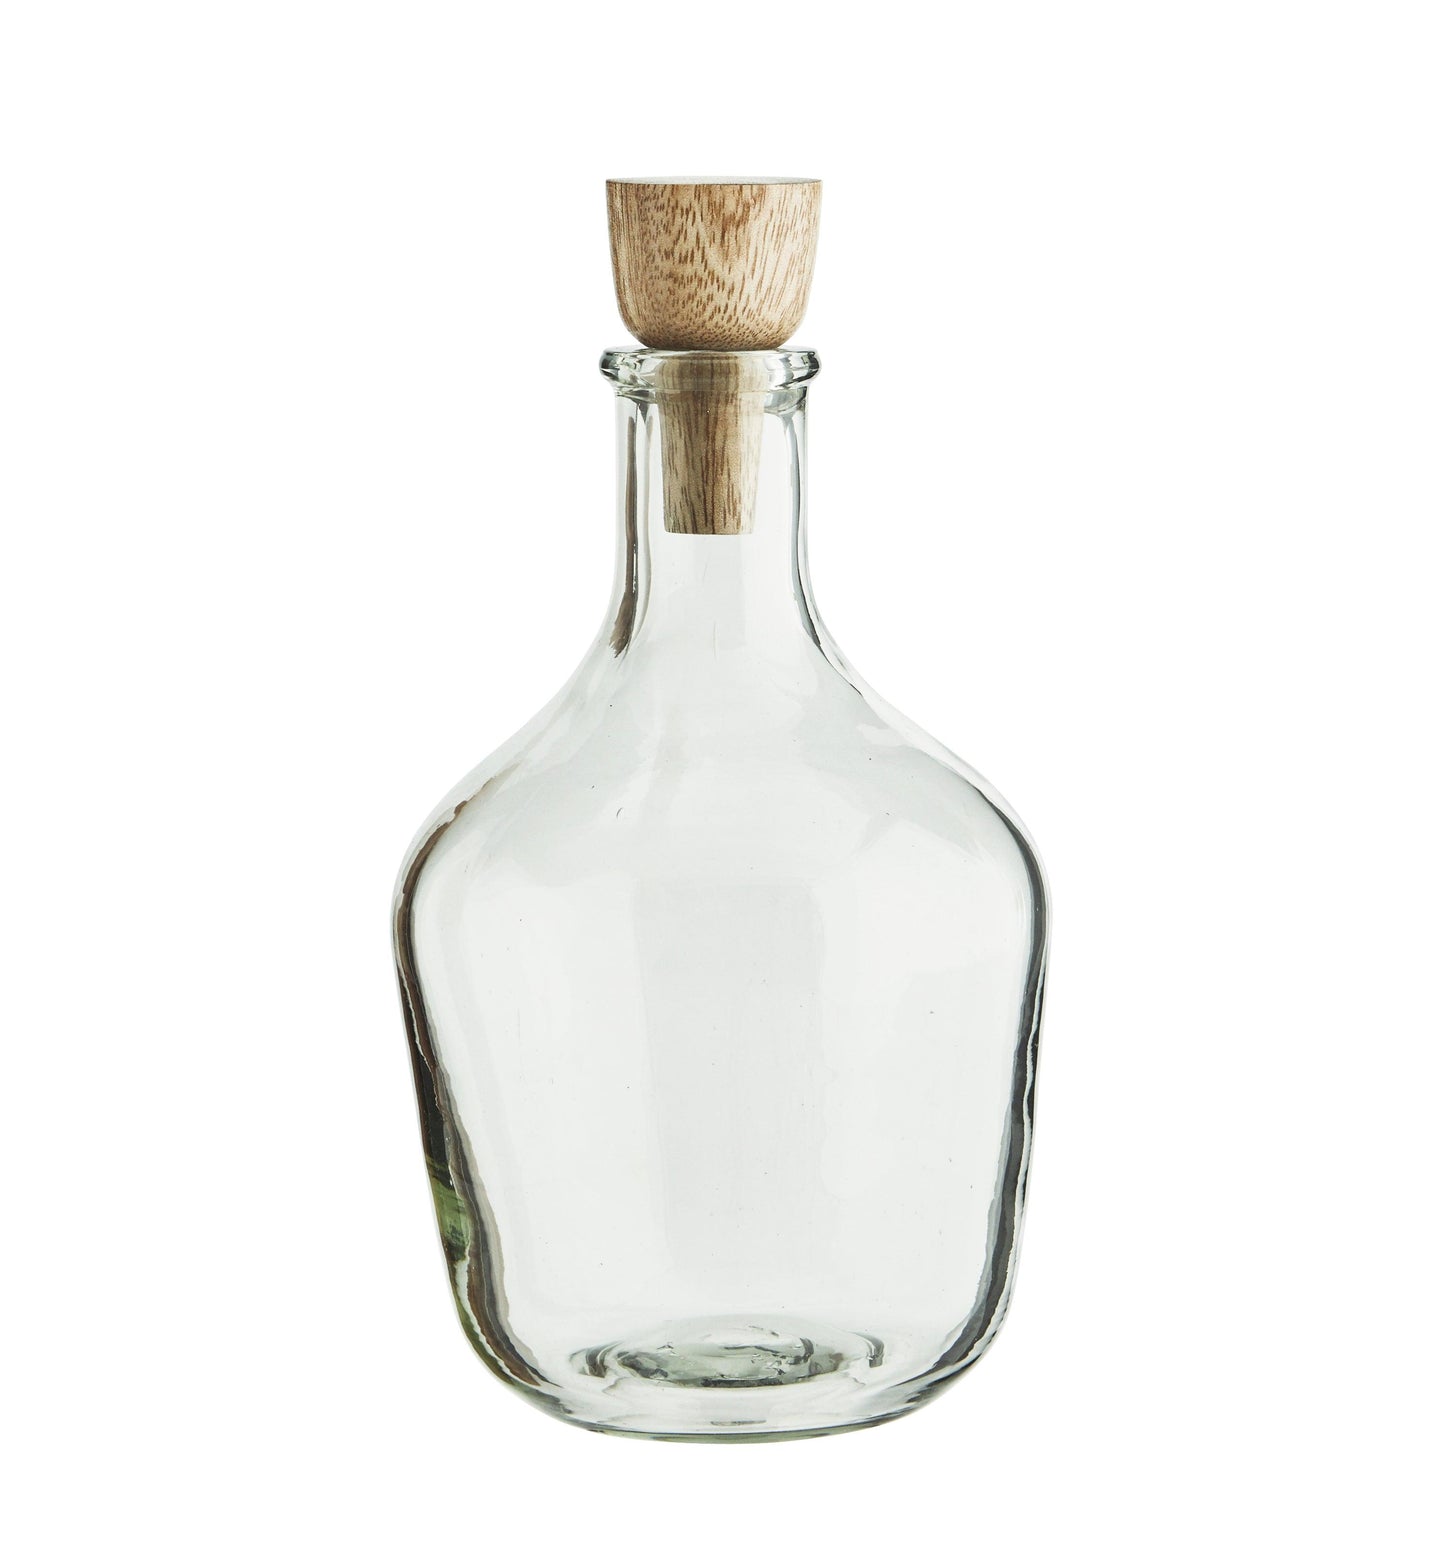 Glass Carafe with Wooden Stopper - Flo & Joe